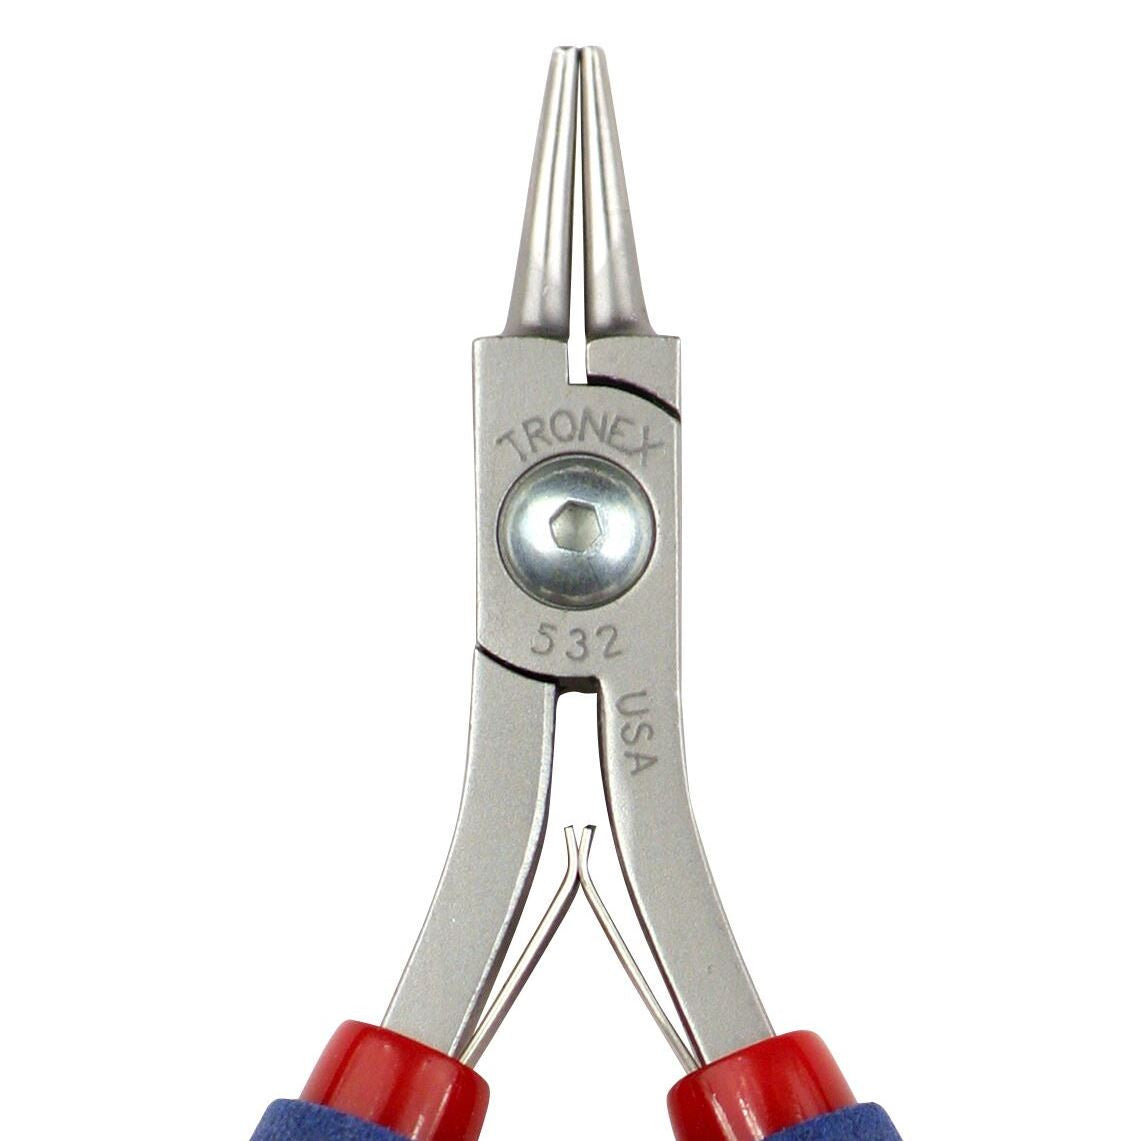 148mm Round Nose Pliers Foam Handles Ergonomic Wire Wrapping